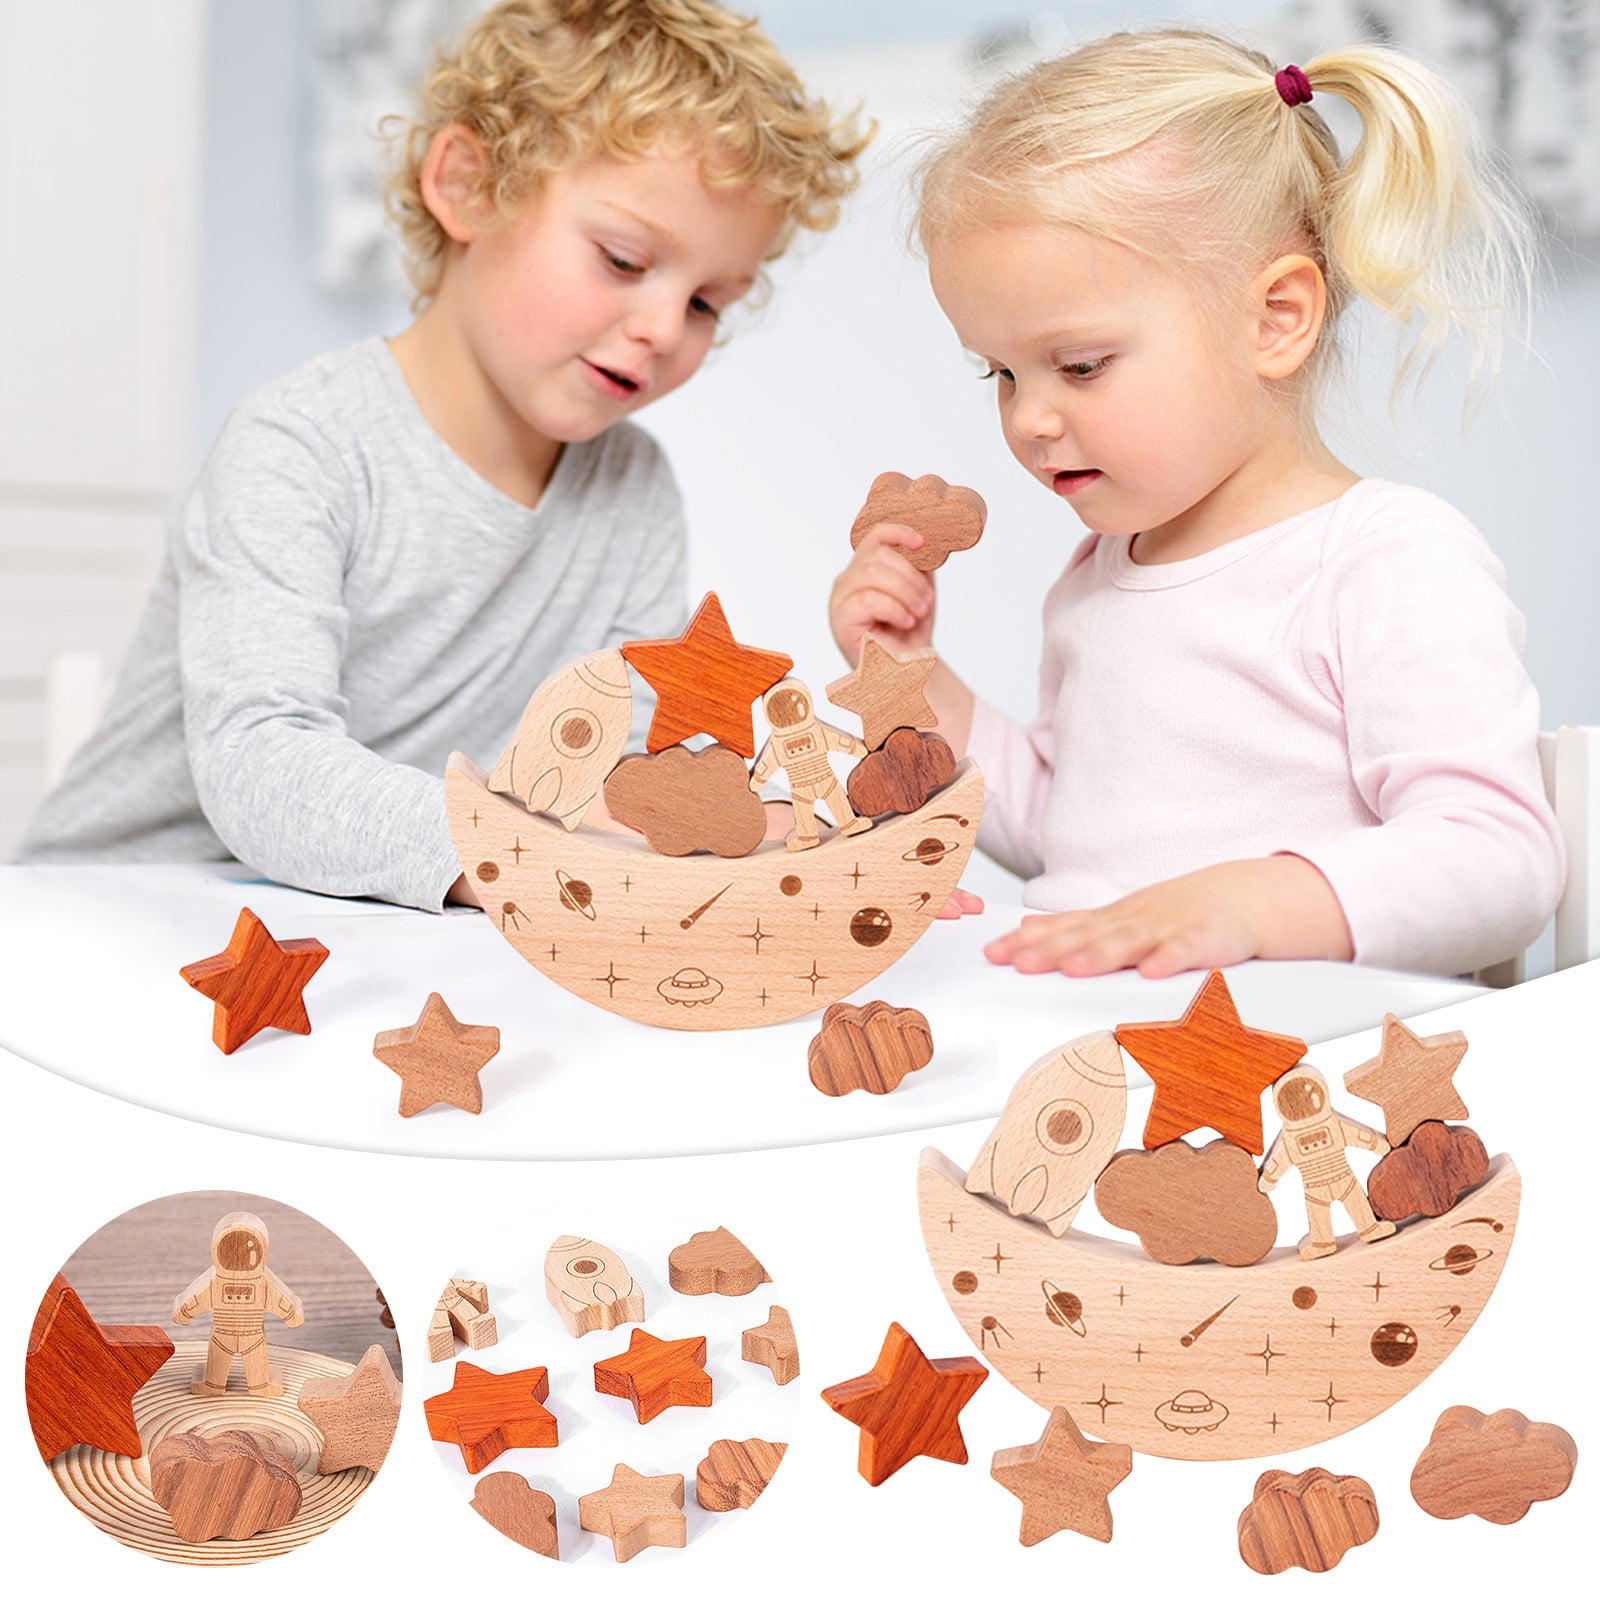 Early Childhood Moon Balance Building Blocks Toys Wooden Teaching For Children 